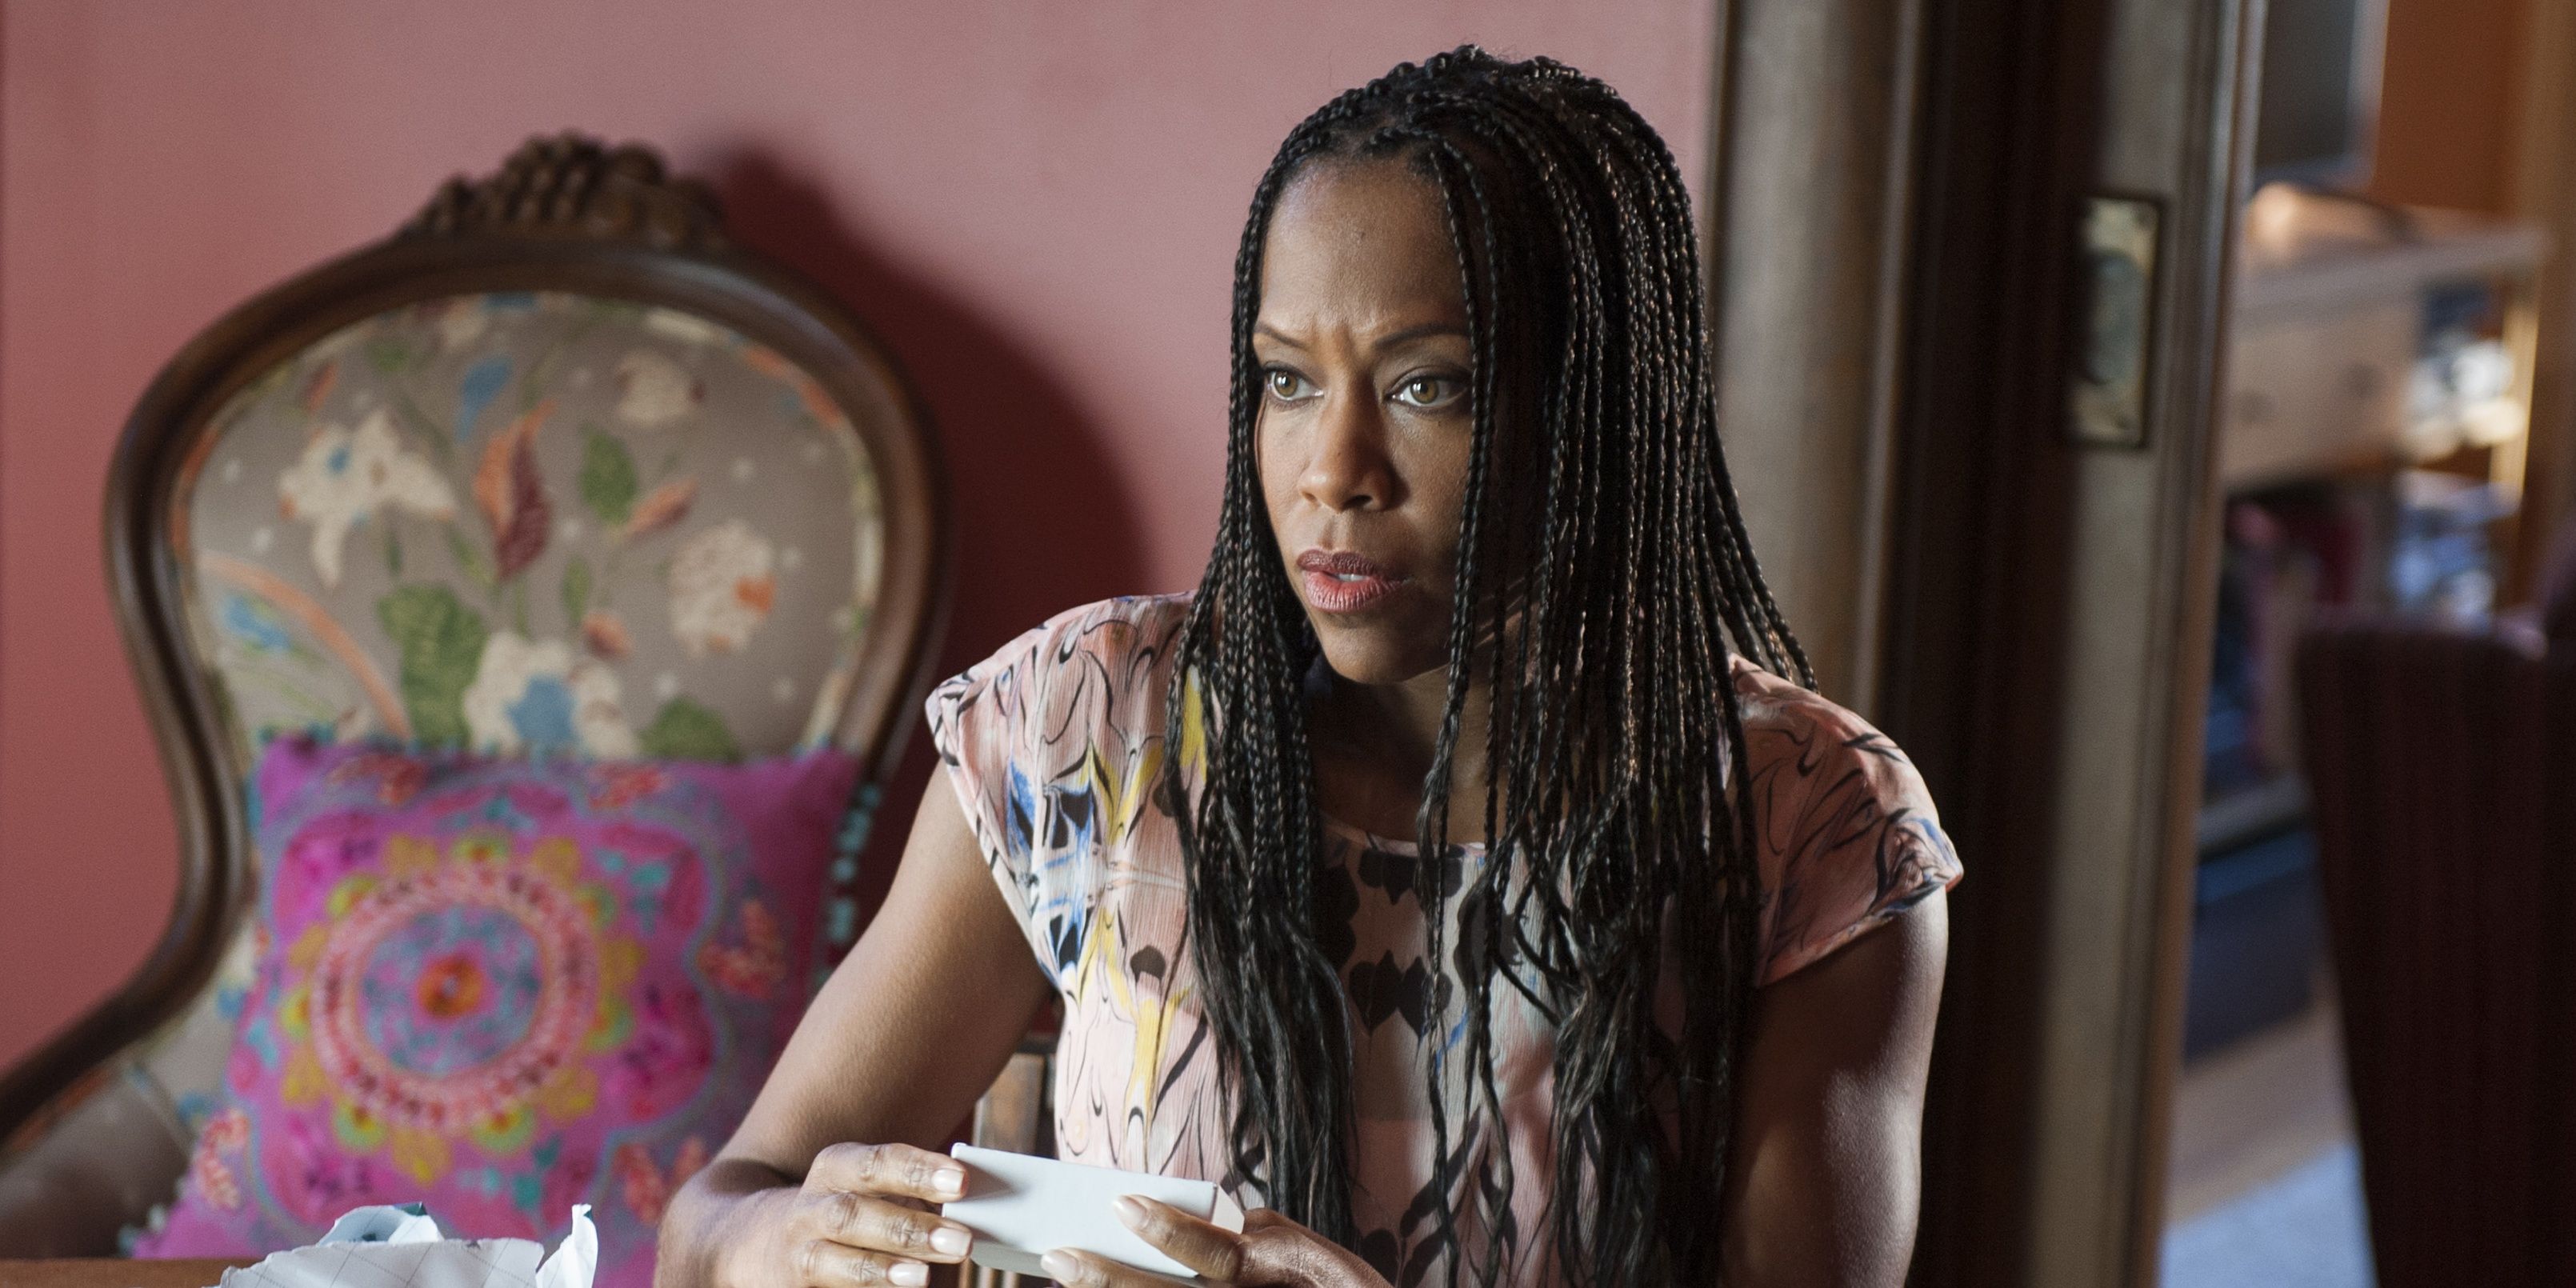 Regina King sits at a table in The Leftovers, looking disturbed.